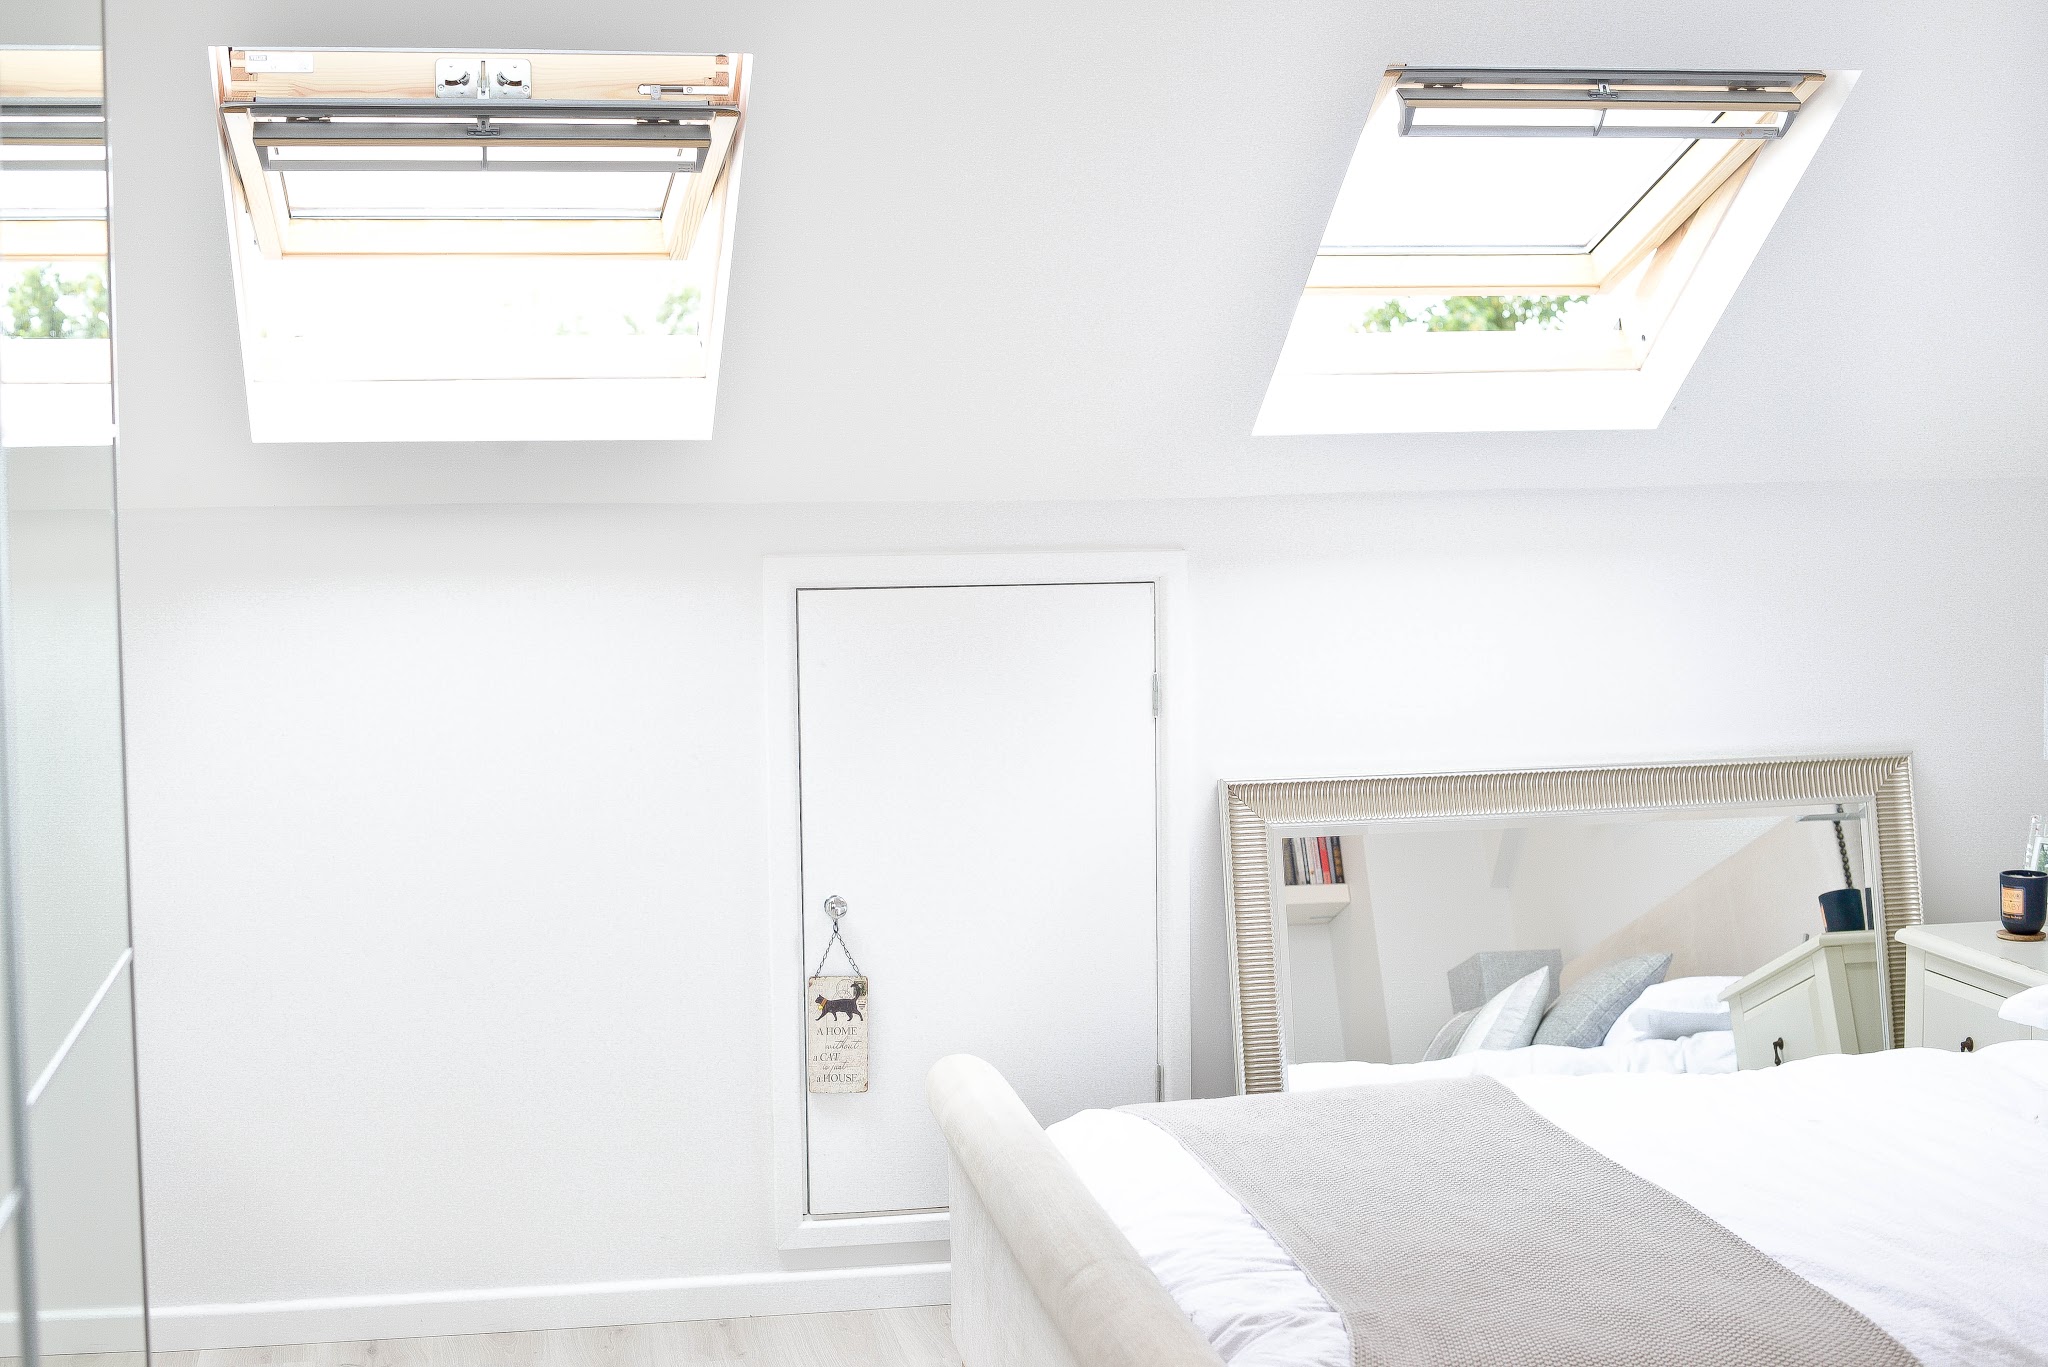 Our New Dormer Loft Conversion and Ensuite, dormer loft, loft conversion, dormer loft conversion cost, dormer loft conversion ideas, dormer attic conversion, types of loft conversion